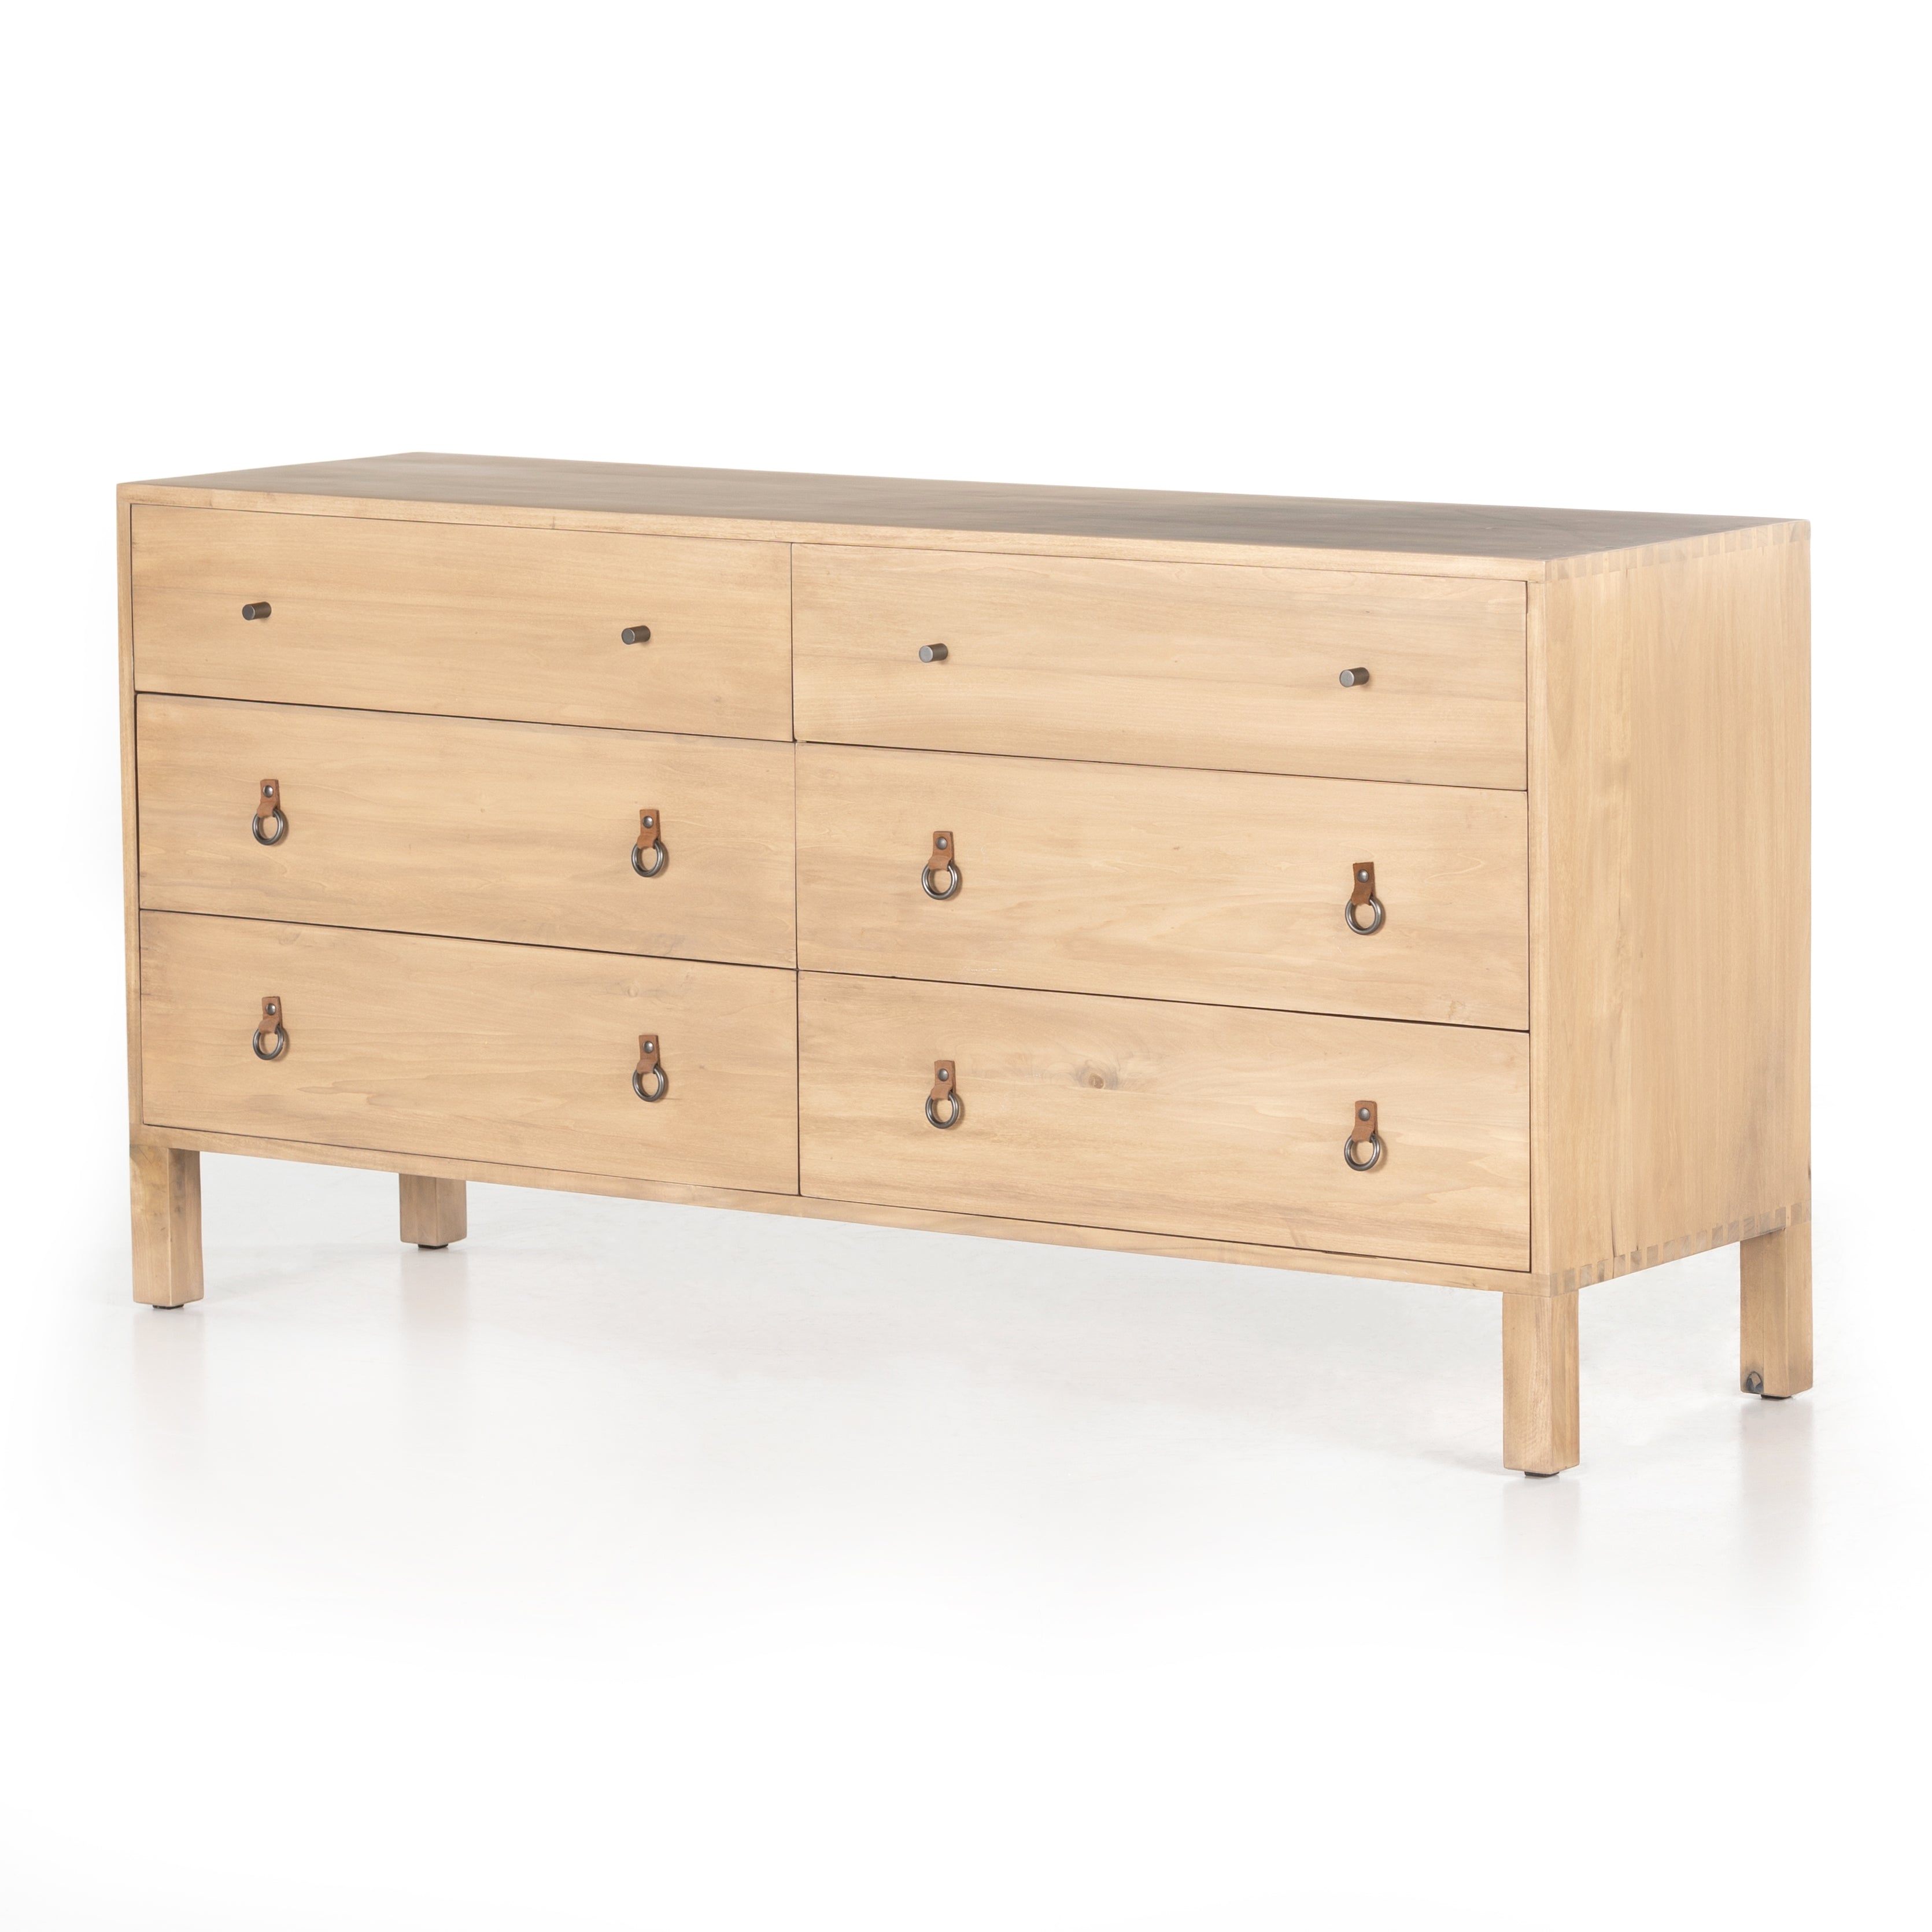 This Isador 6 Drawer Dresser - Dry Wash Poplar is beautifully simple in spirit. Solid dry-washed poplar forms a spacious six-drawer dresser, with dovetail joinery plus iron and leather hardware for a fresh, bright look in any bedroom.   Overall Dimensions: 65.00"w x 19.00"d x 32.25"h